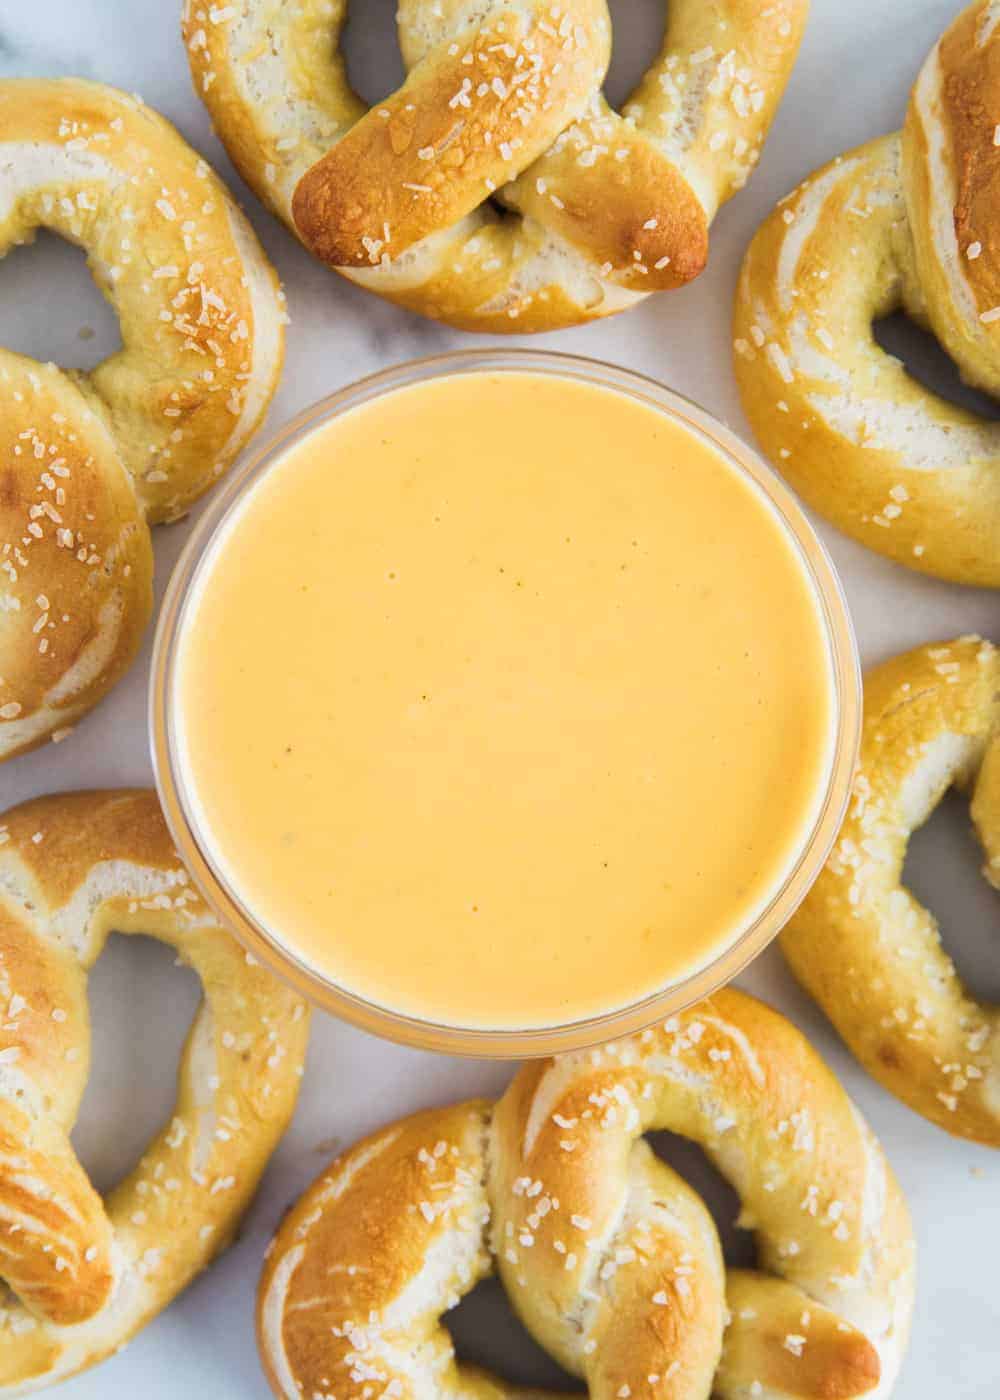 Cheese dip for pretzels in glass bowl.